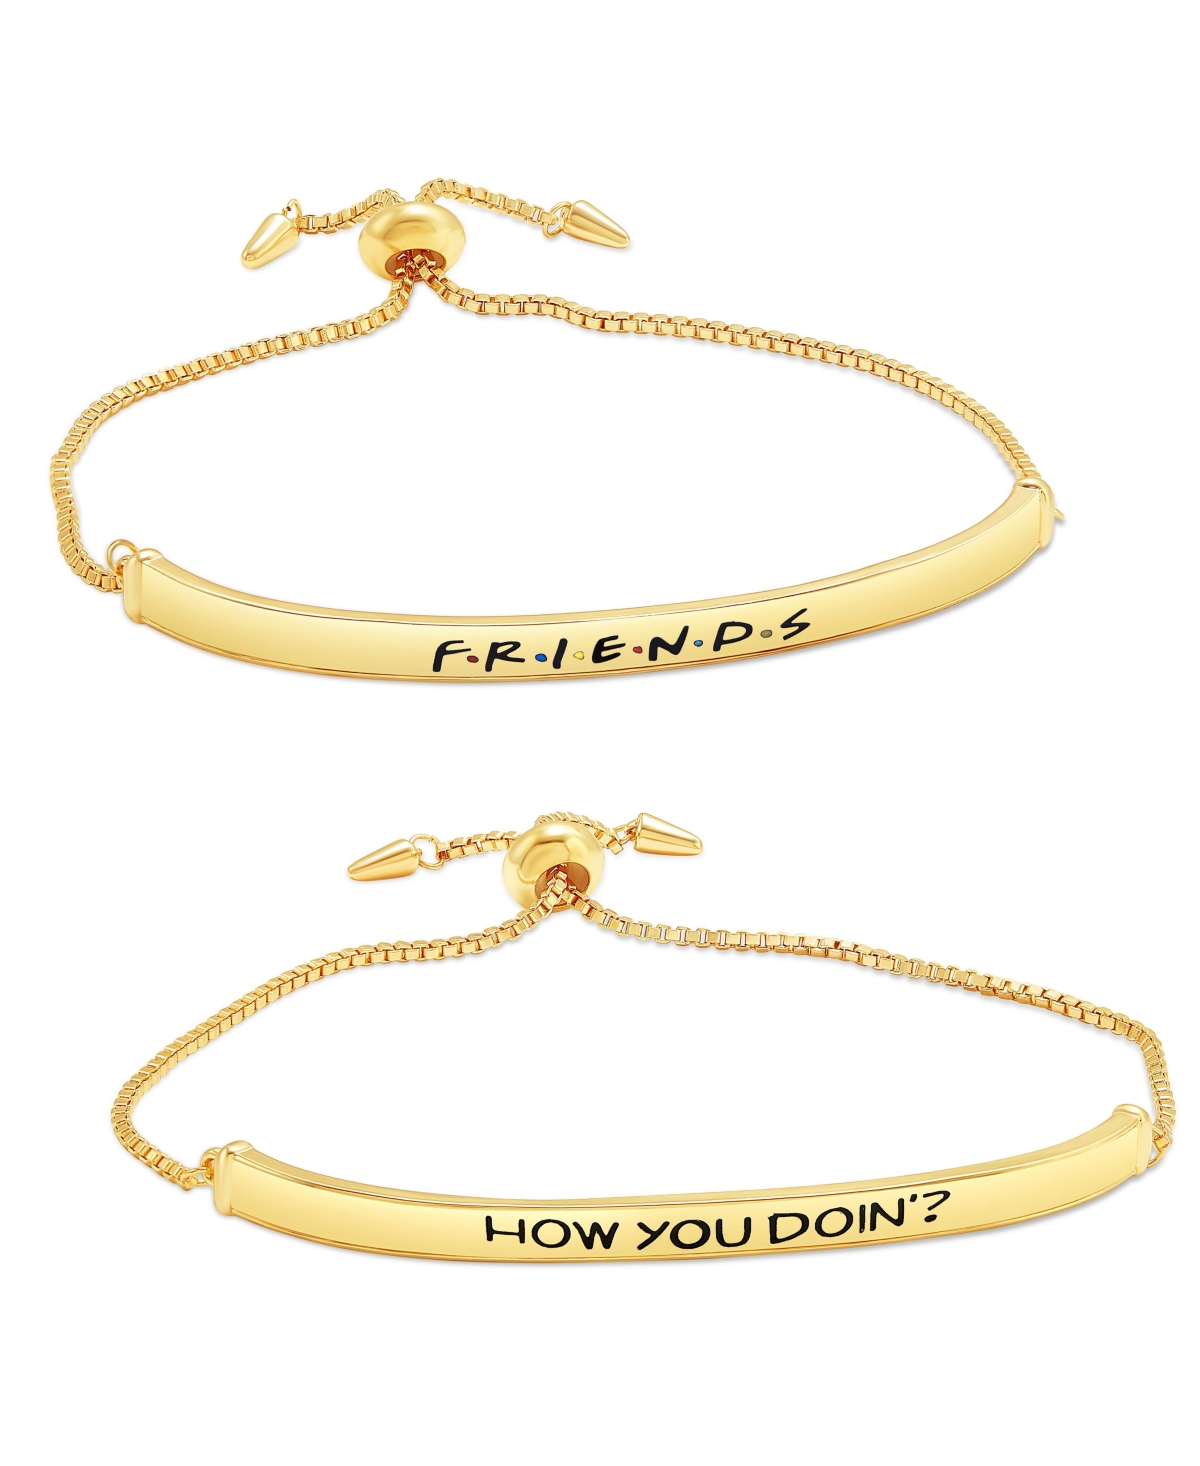 Tv Show Themed Gold Plated Bar Bracelets, Logo and How You Doin' - Set of 2 - Gold tone